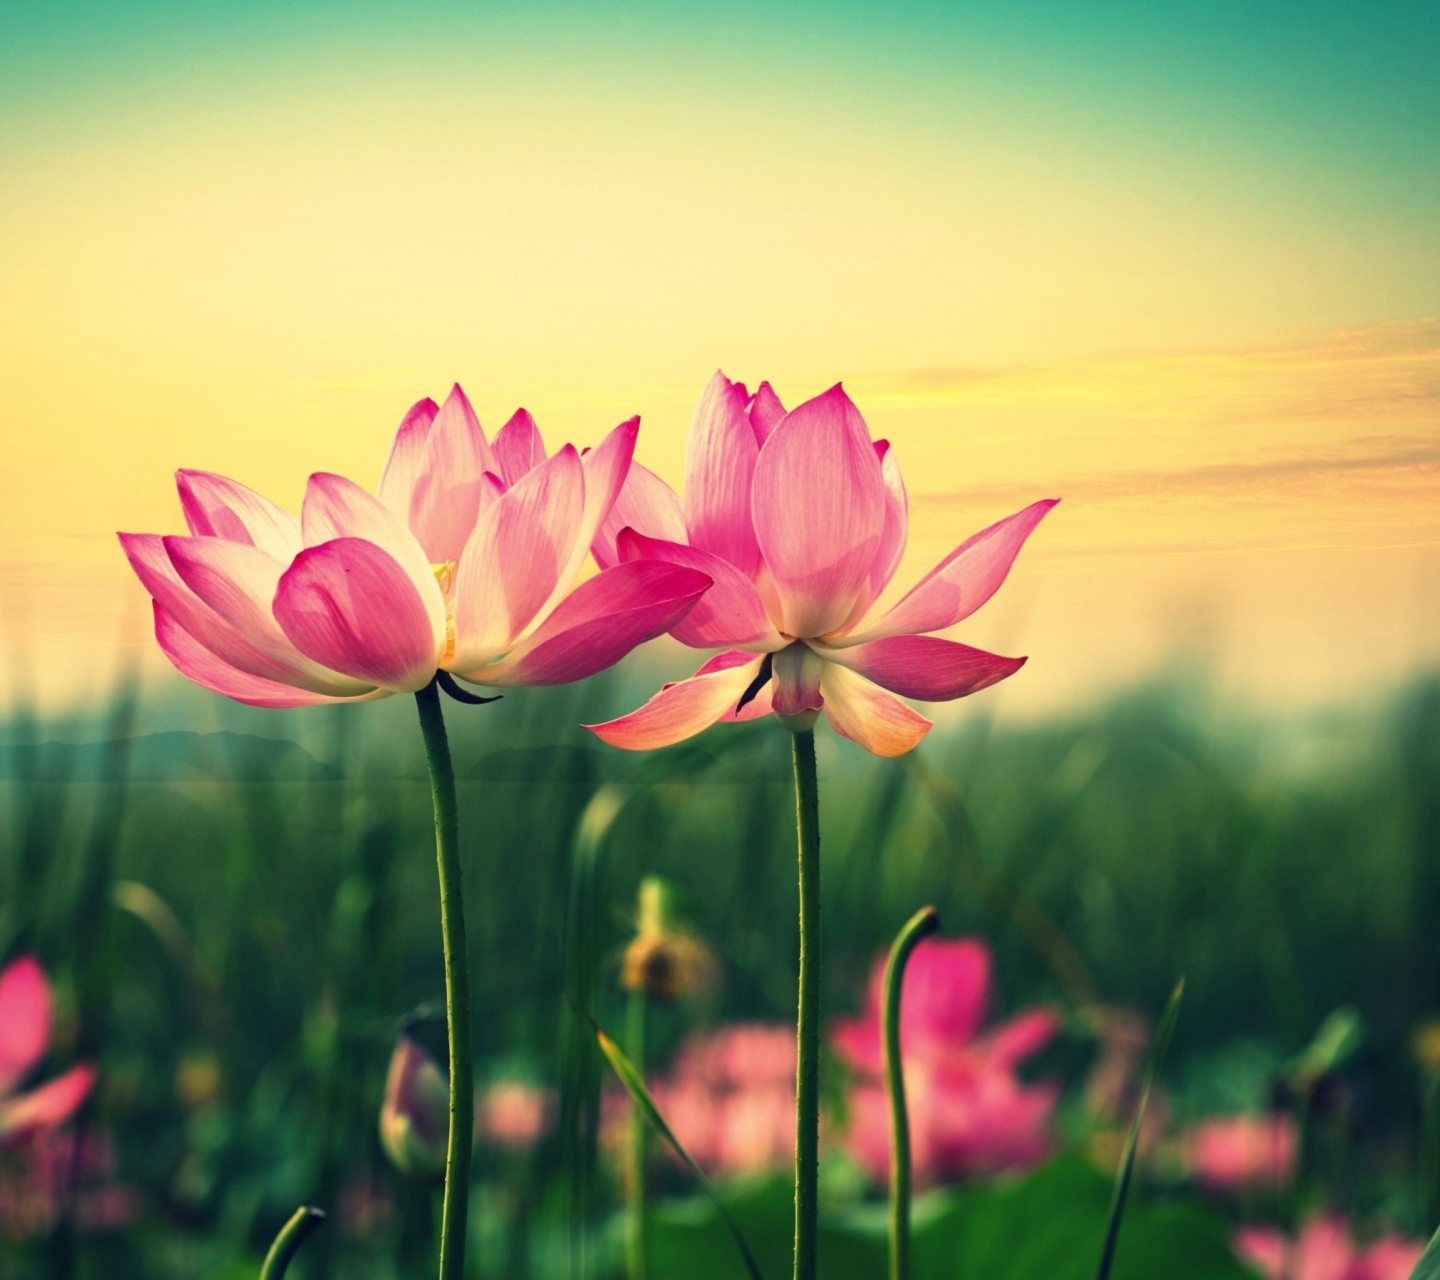 Pink Flowers At Sunset wallpaper 1440x1280